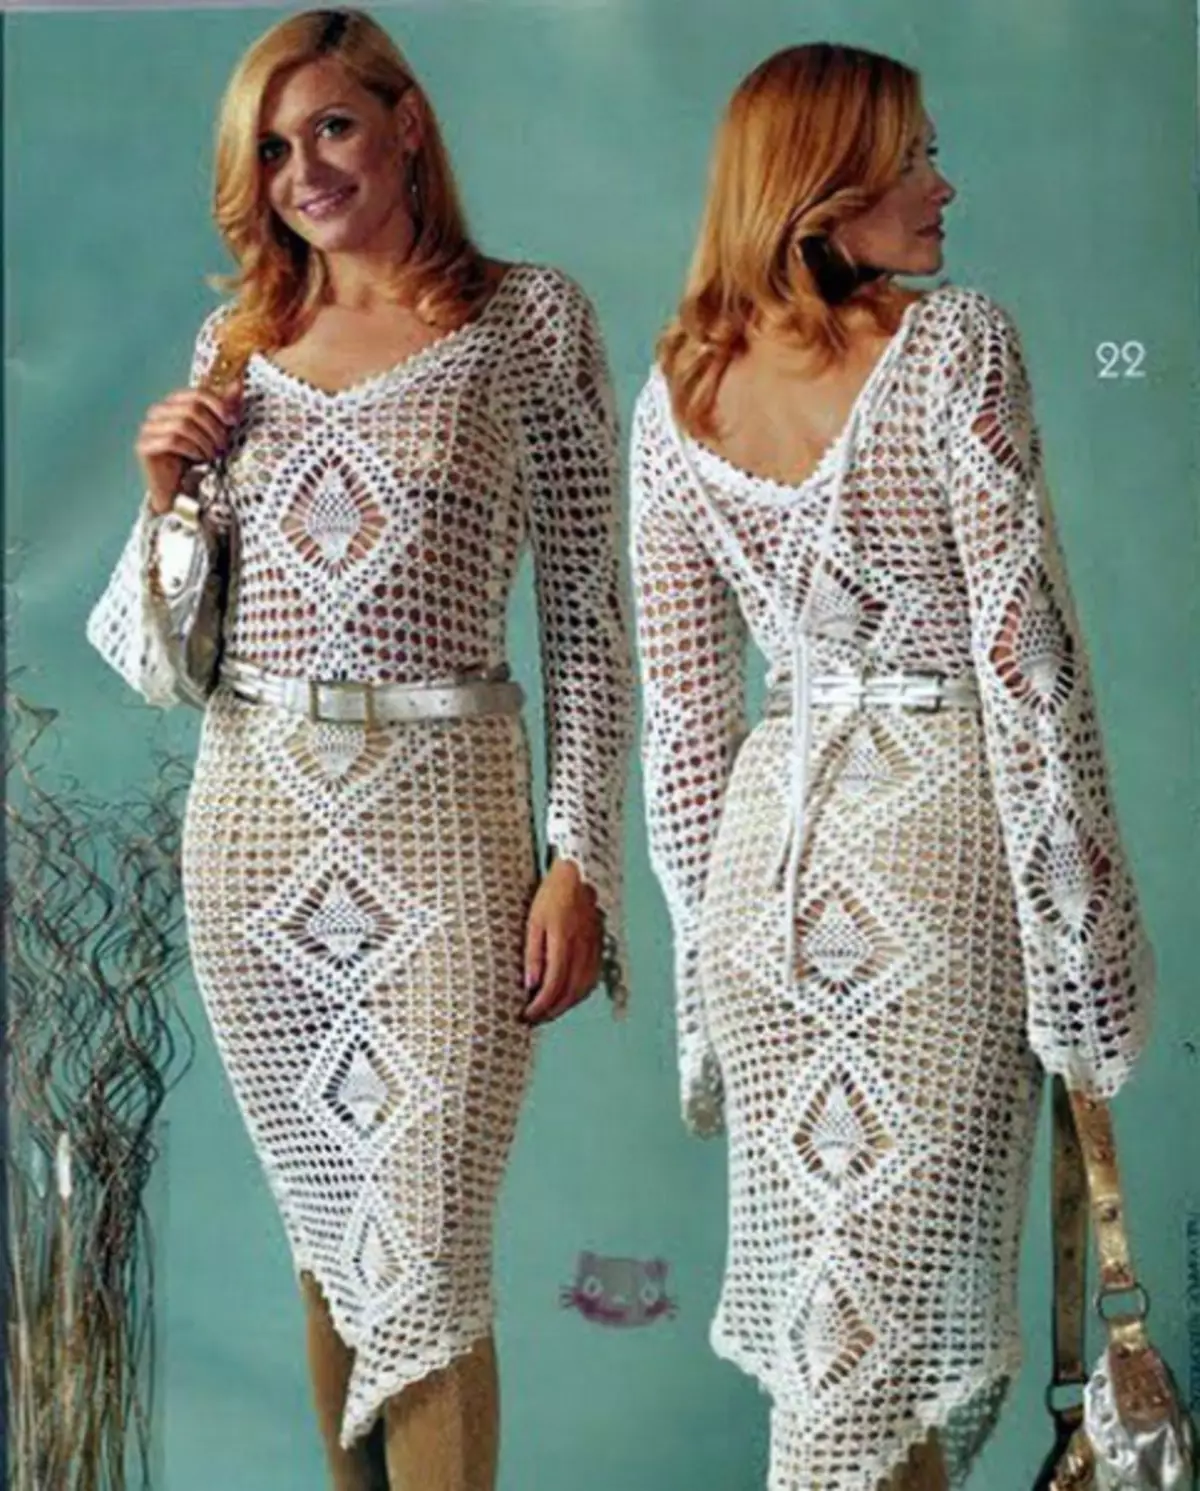 In the evening dress crochet Openwork takes and shawl with schemes